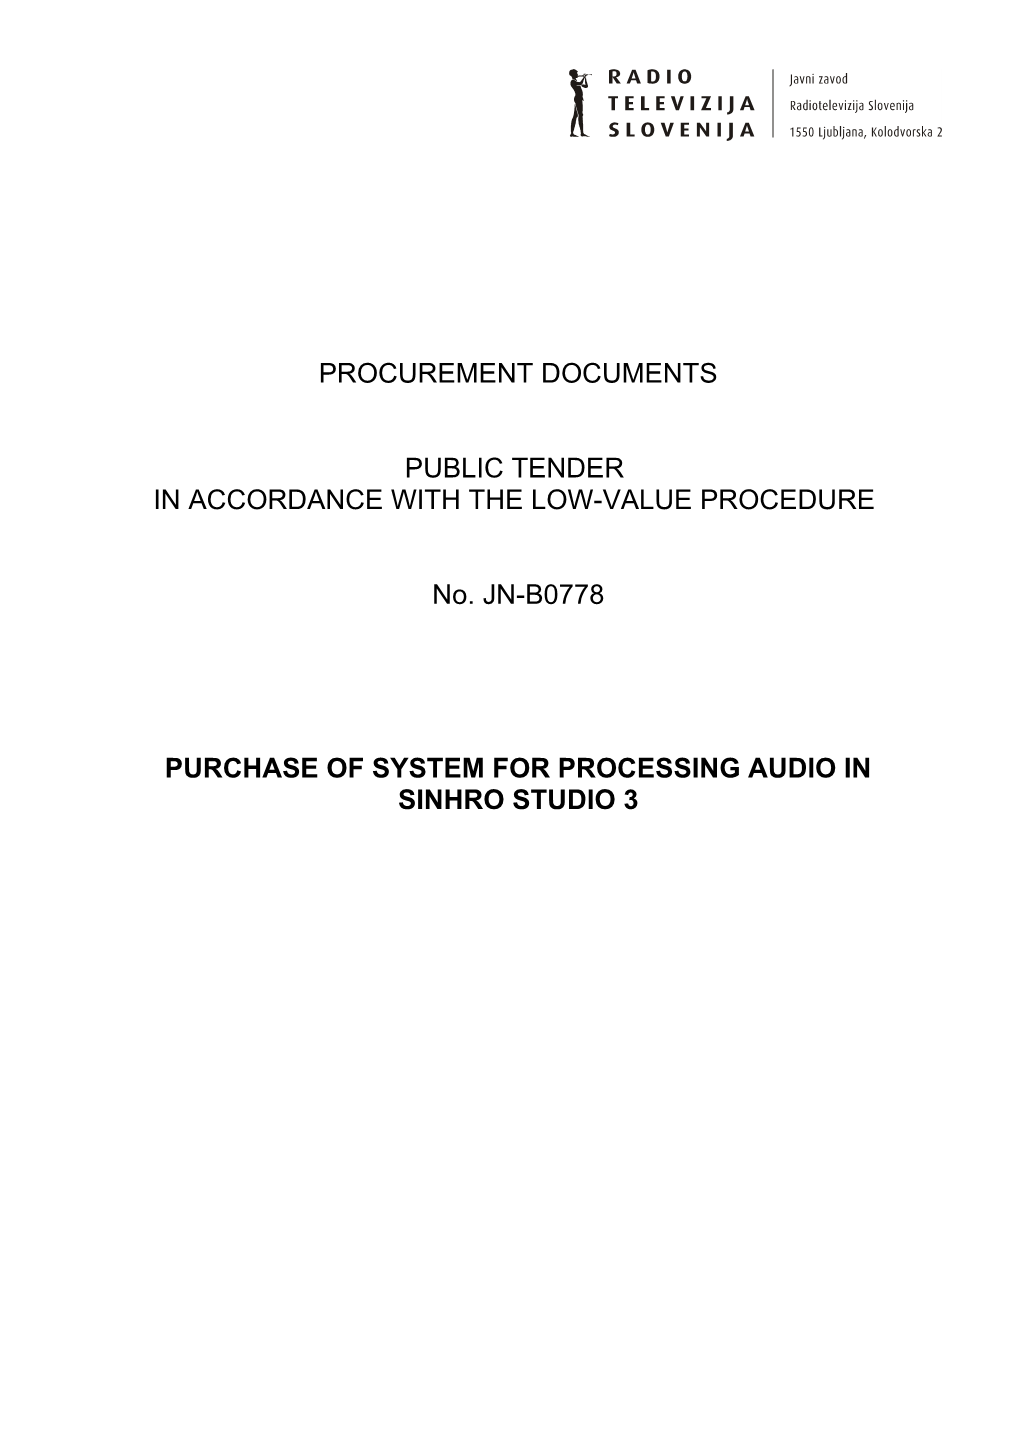 Purchase of System for Processing Audio in Sinhro Studio 3